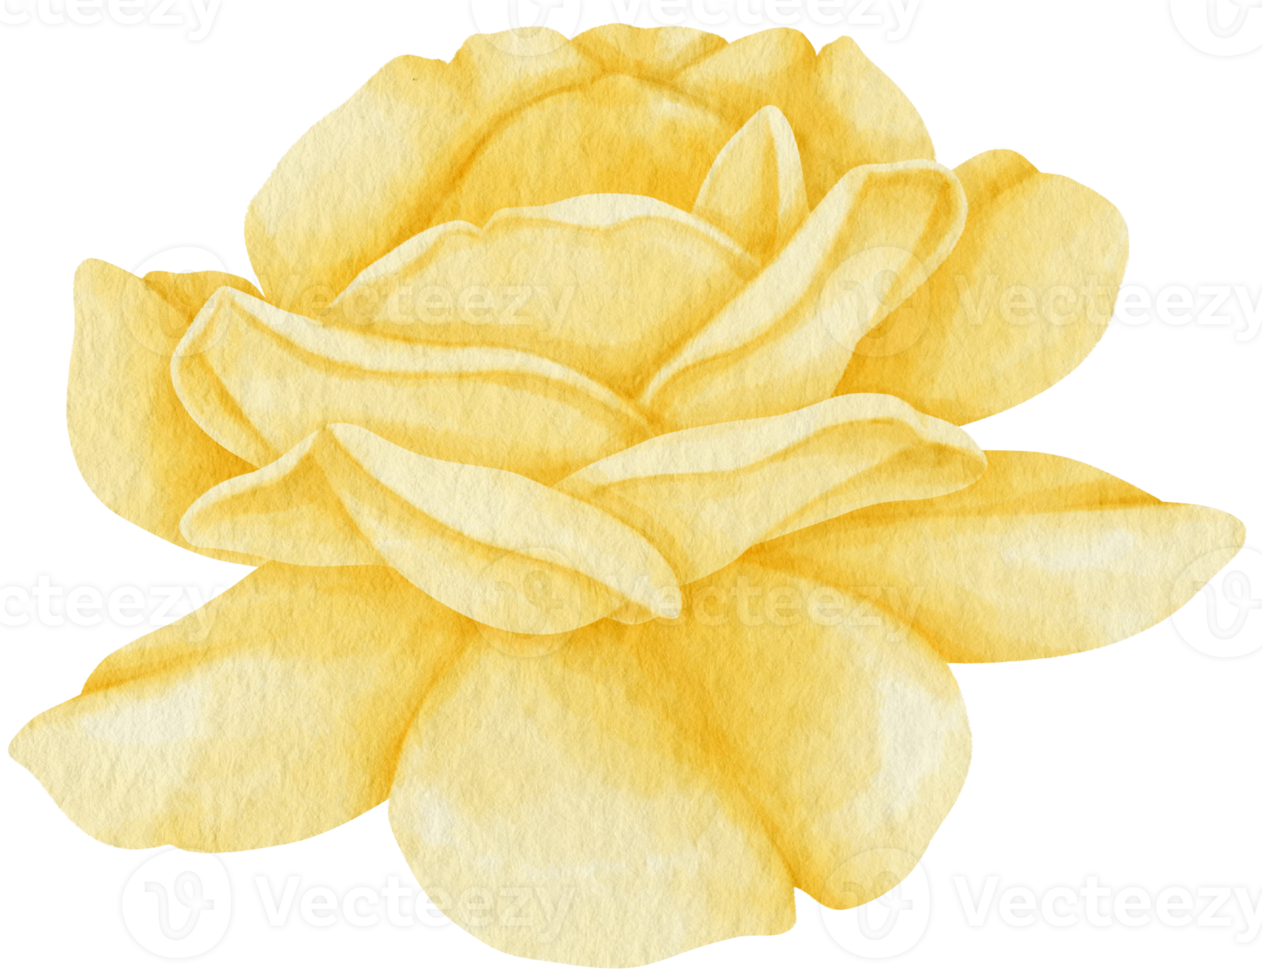 Yellow rose flower watercolor style for Decorative Element png